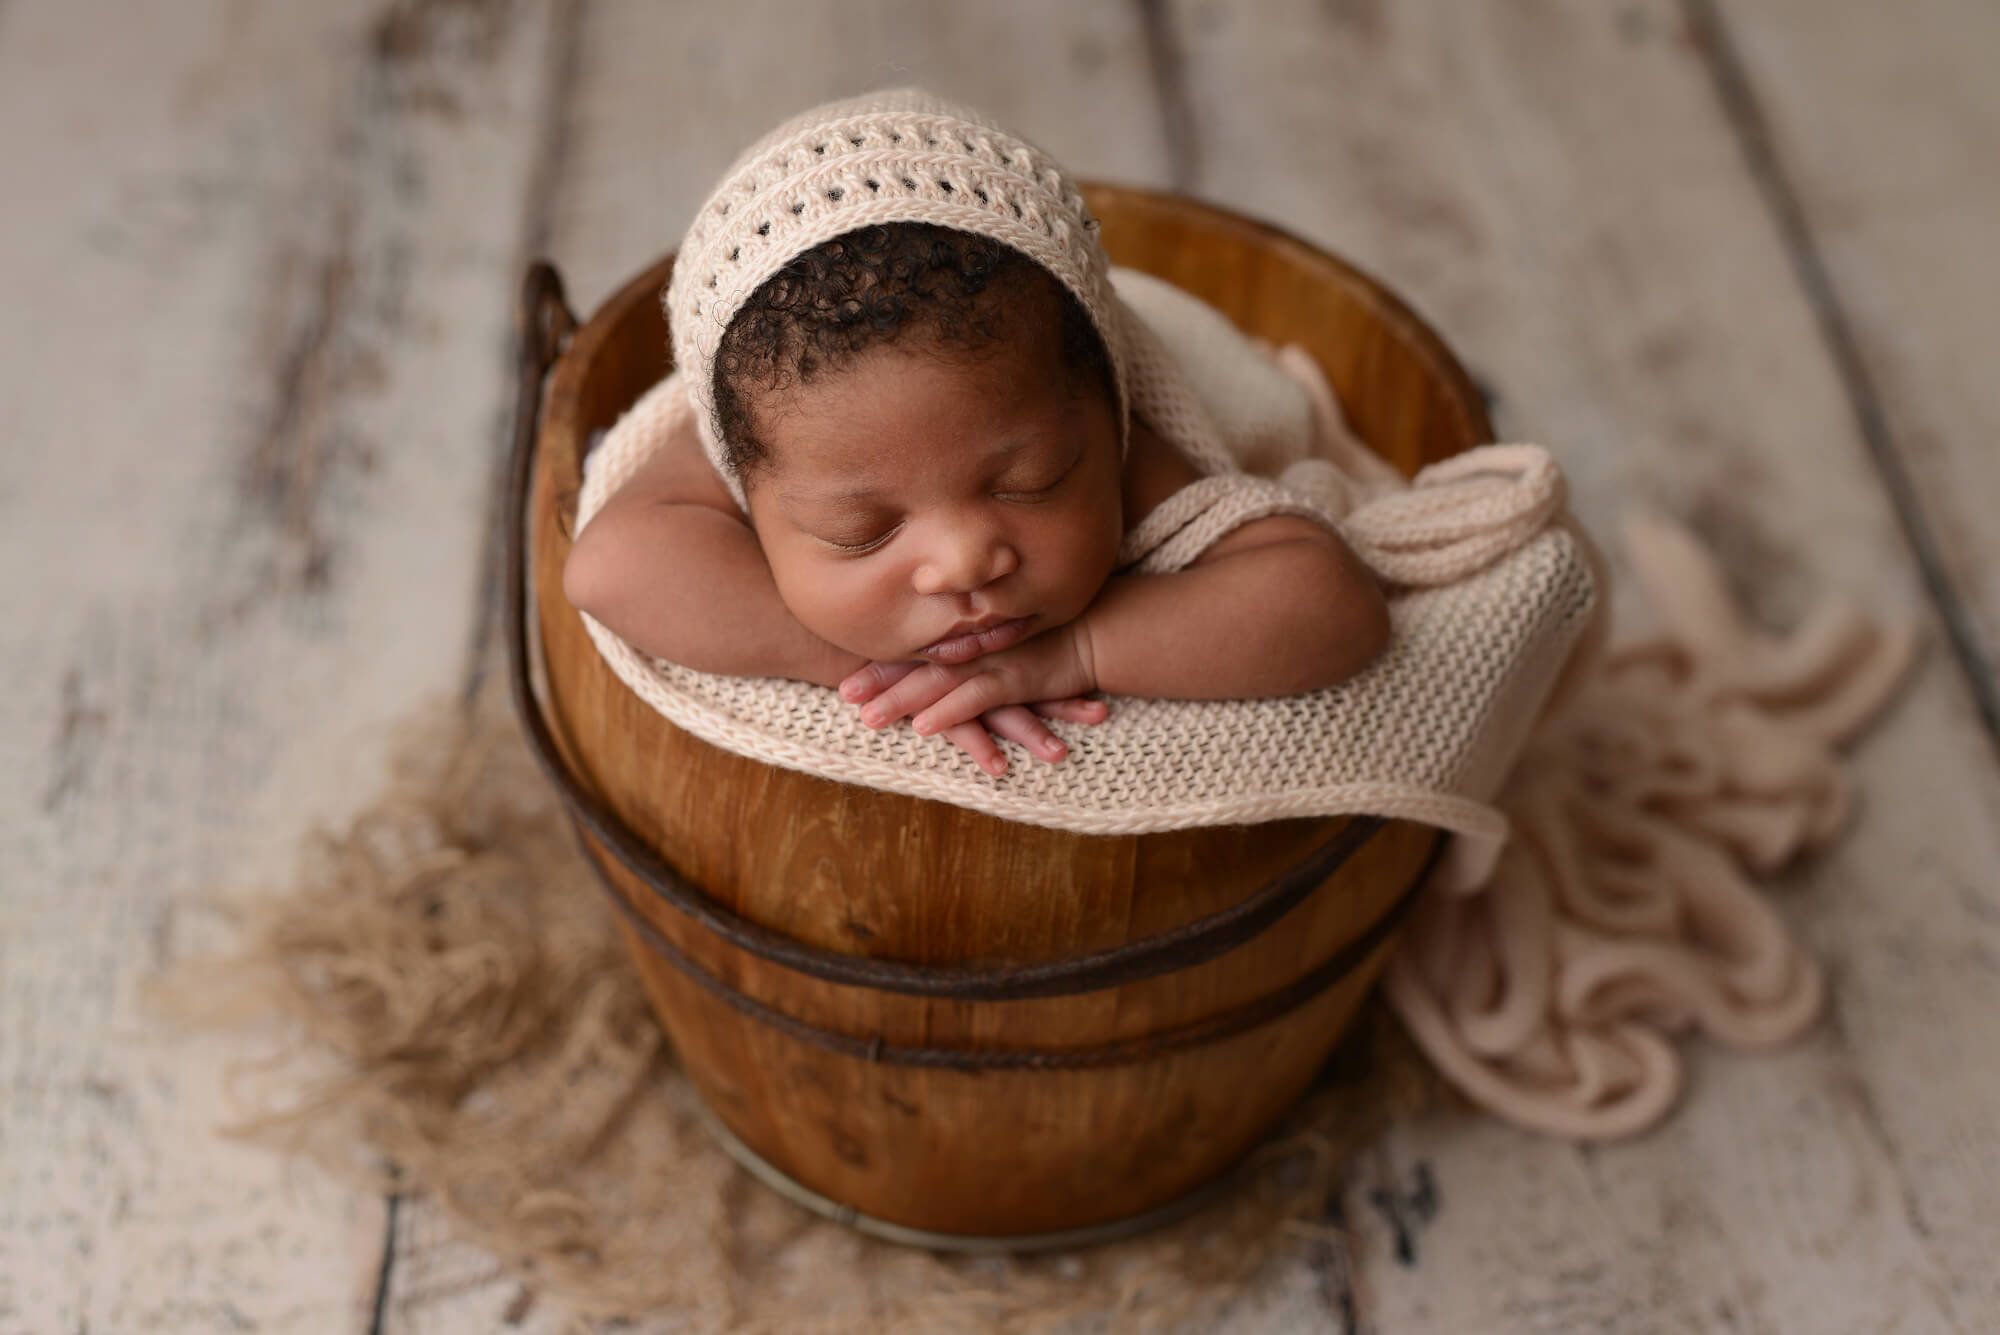 Portrait of a newborn baby covered by a crochet blanket sleeping soundly in a wooden bucket